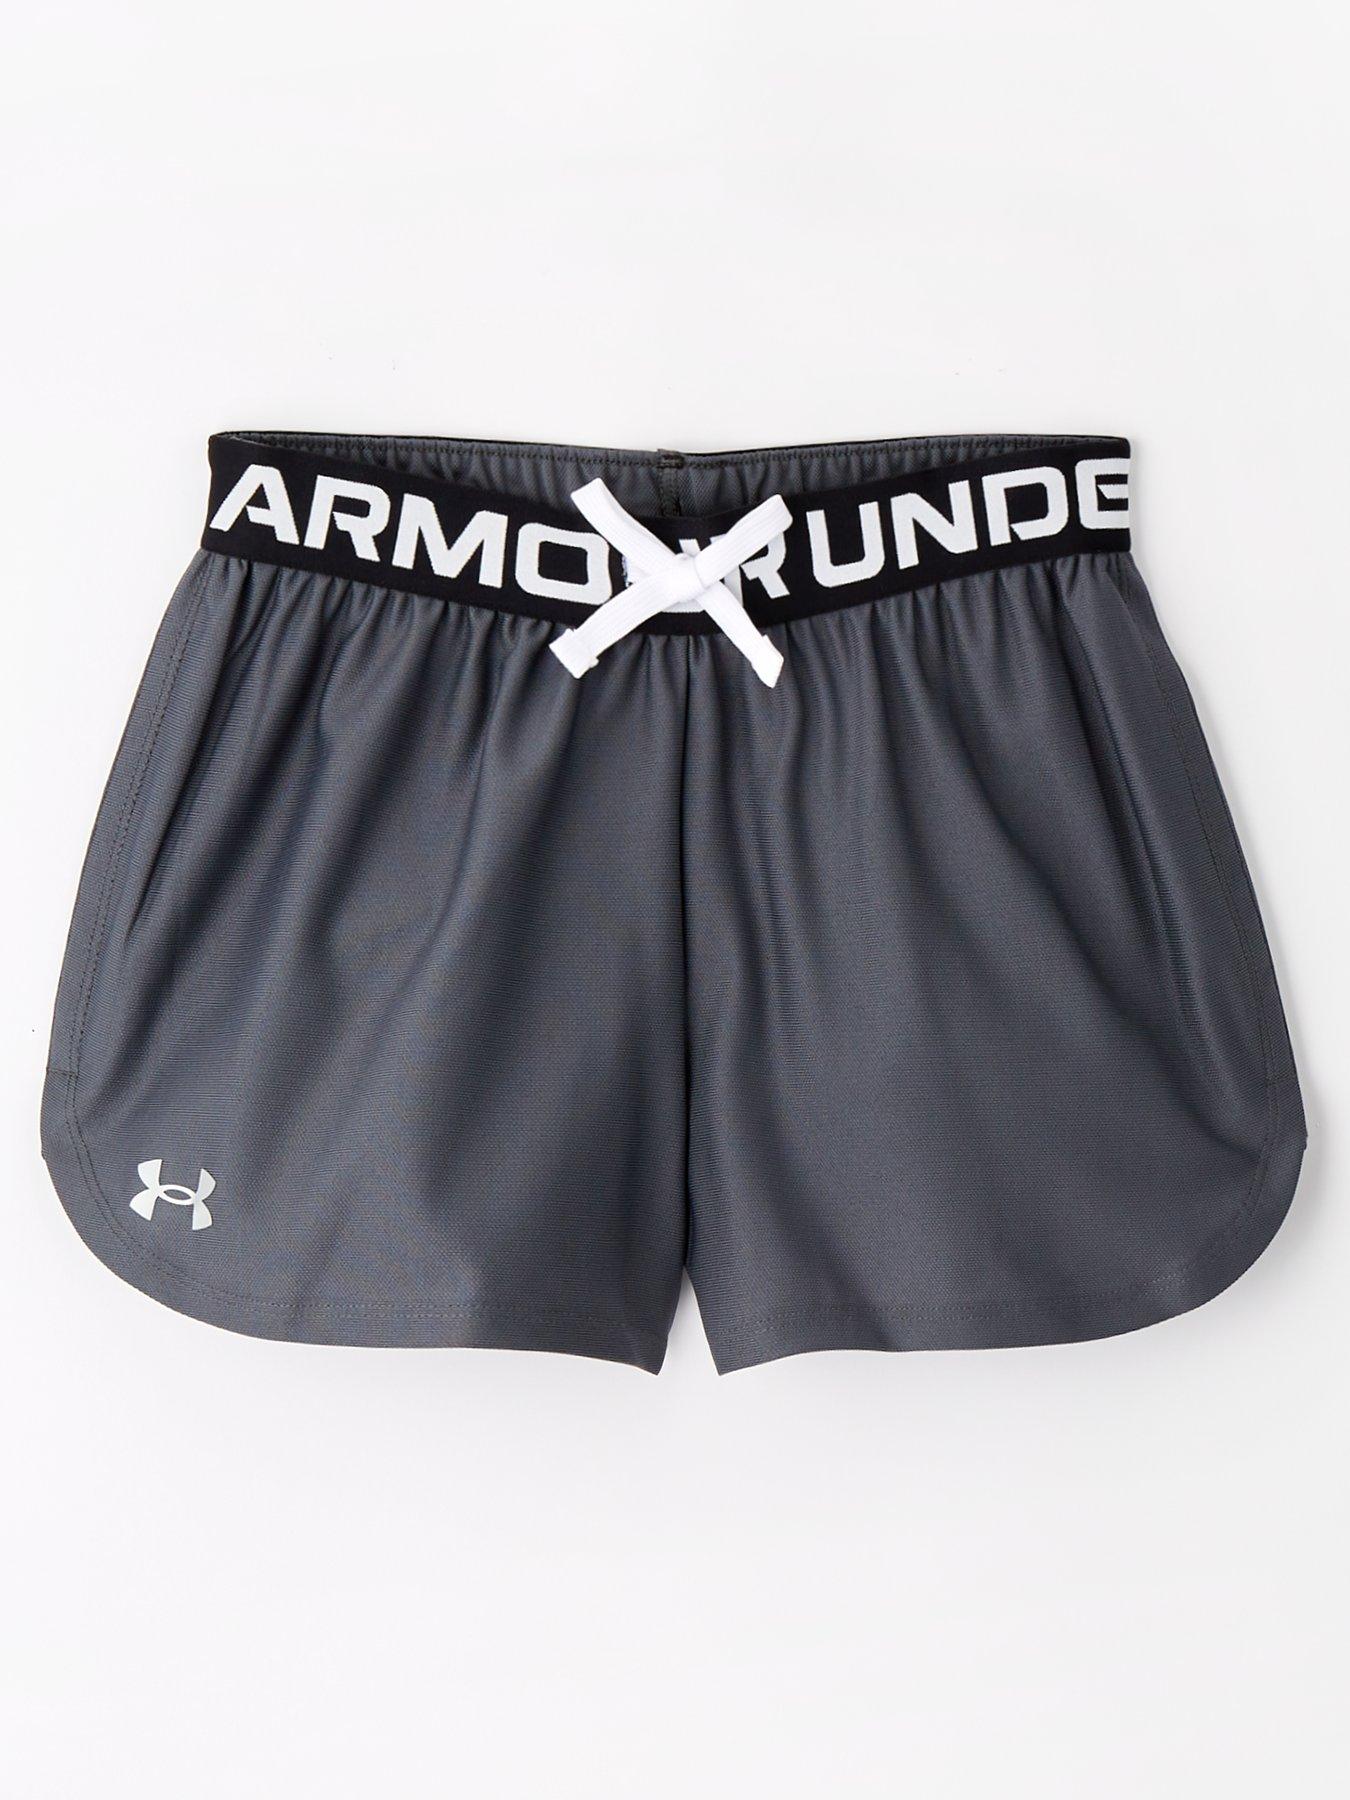 Under Armour Play Up Solid girls' shorts